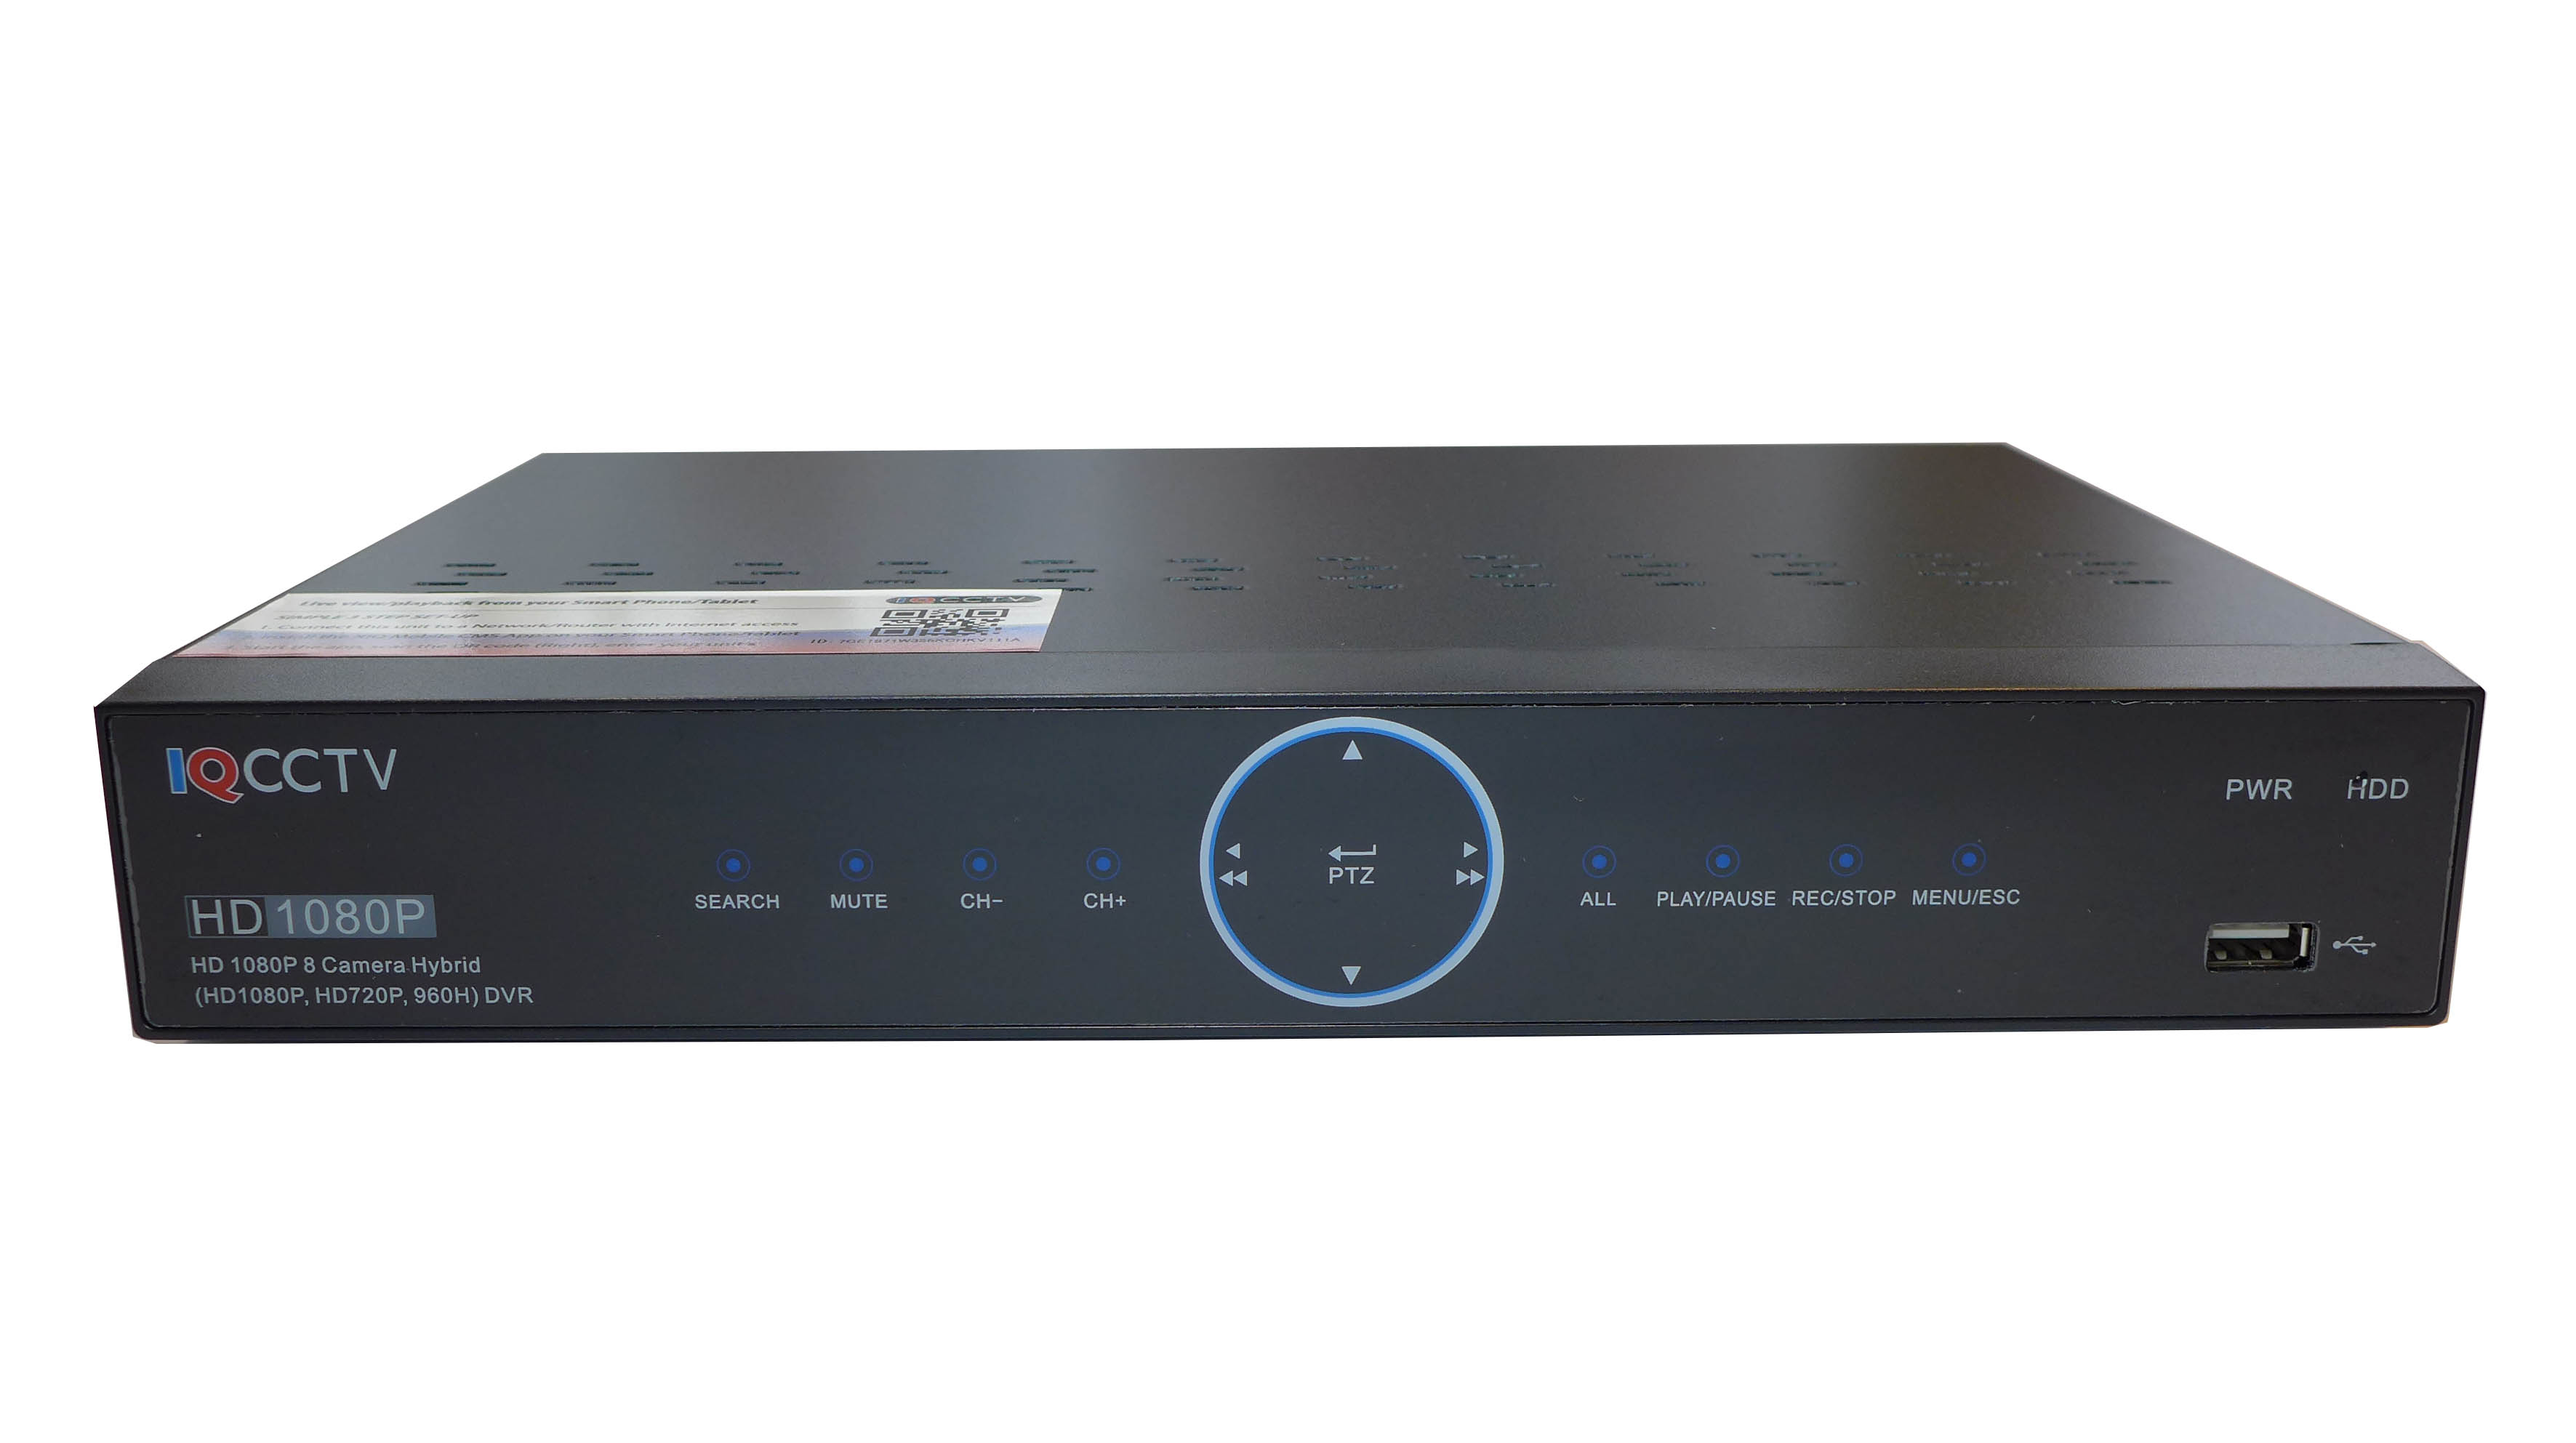 DVR optager IQR1080